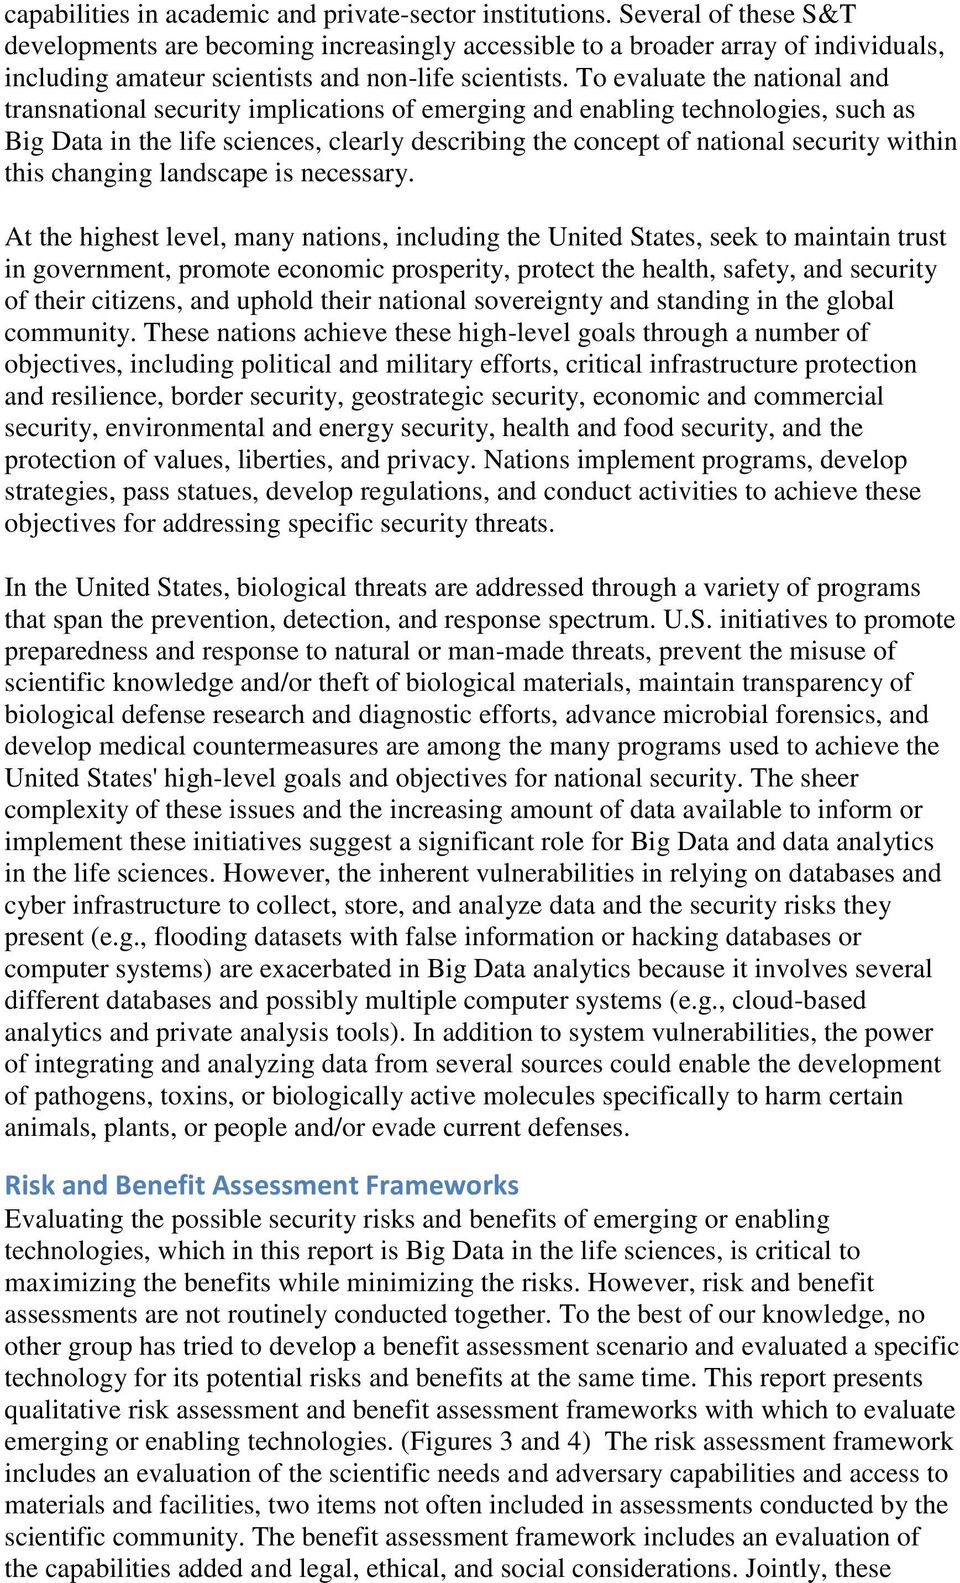 To evaluate the national and transnational security implications of emerging and enabling technologies, such as Big Data in the life sciences, clearly describing the concept of national security